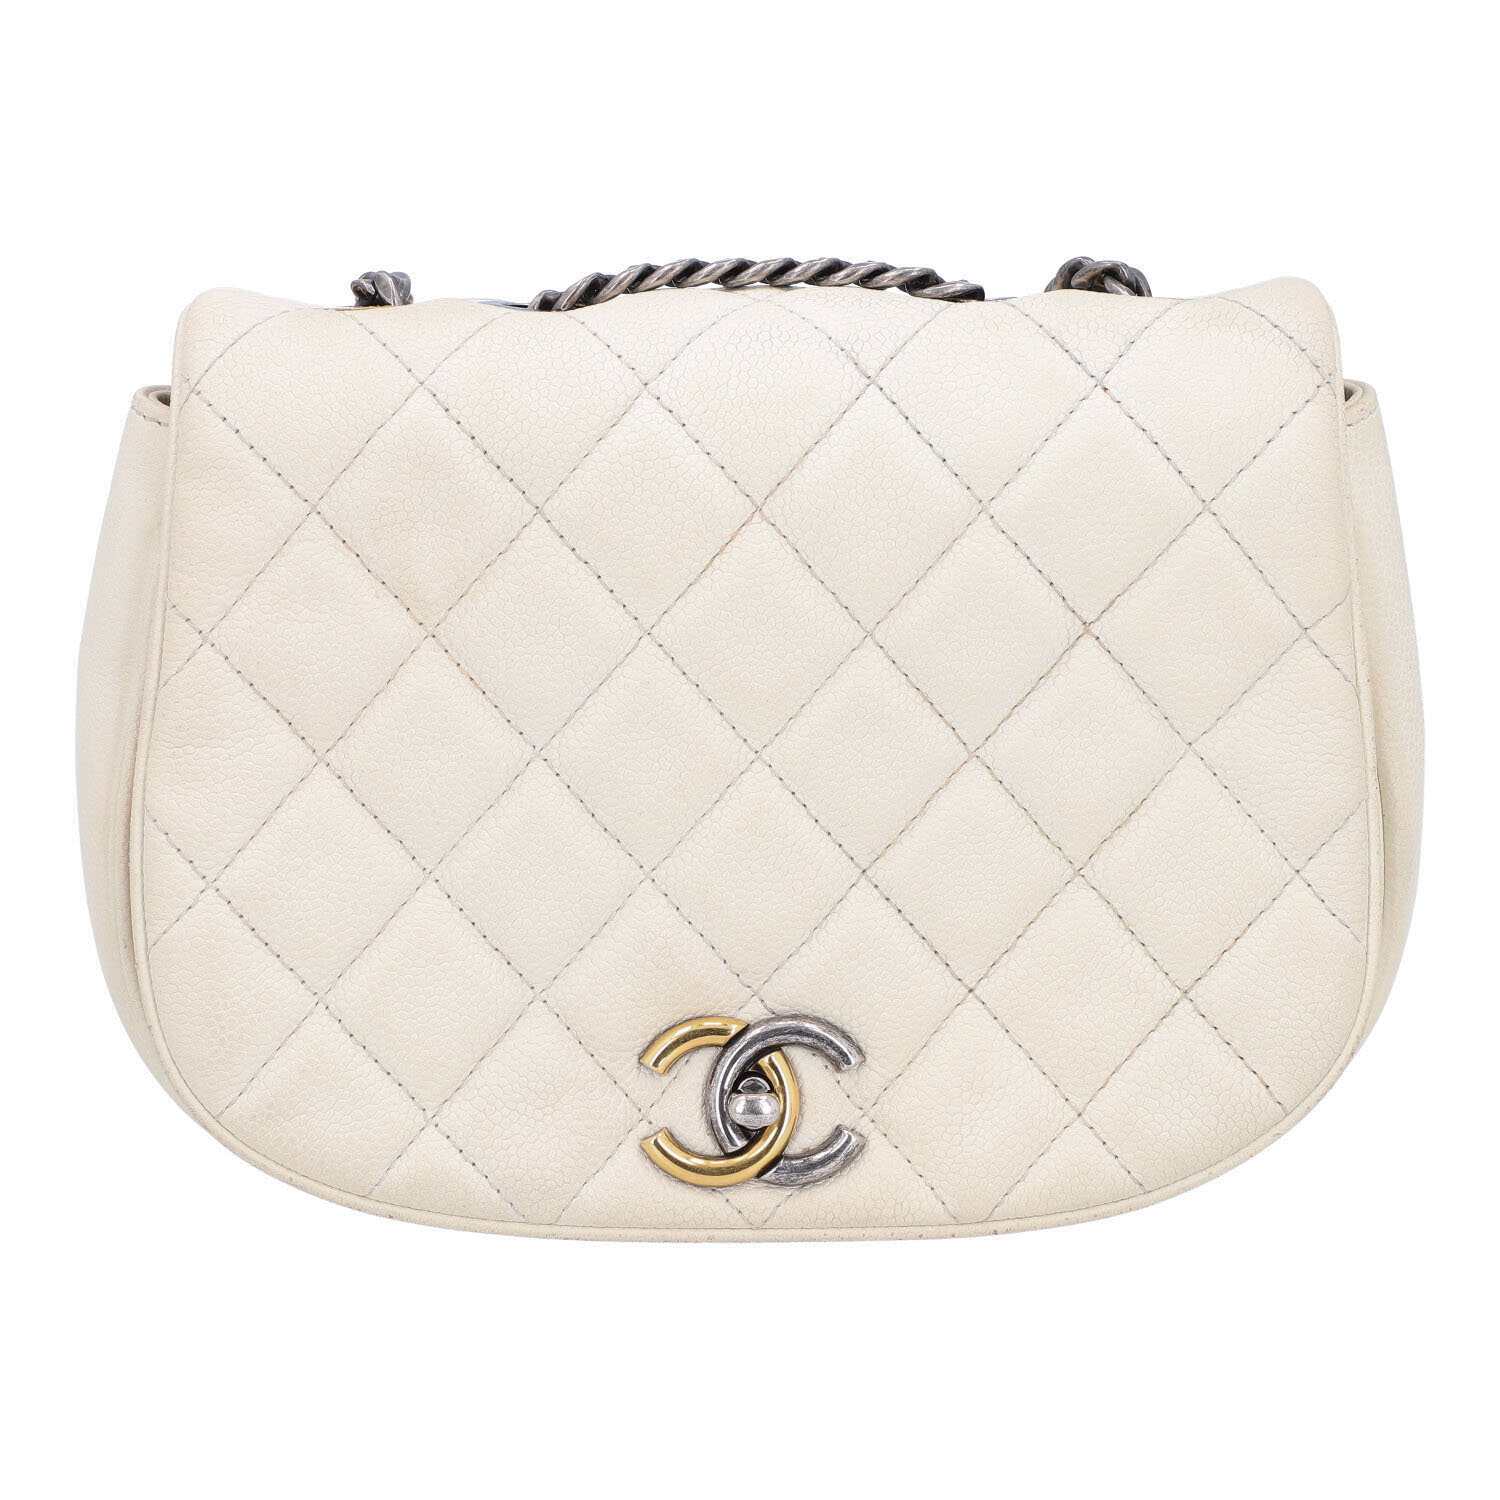 Authentic Chanel Pre-Owned - PAPILLONKIA